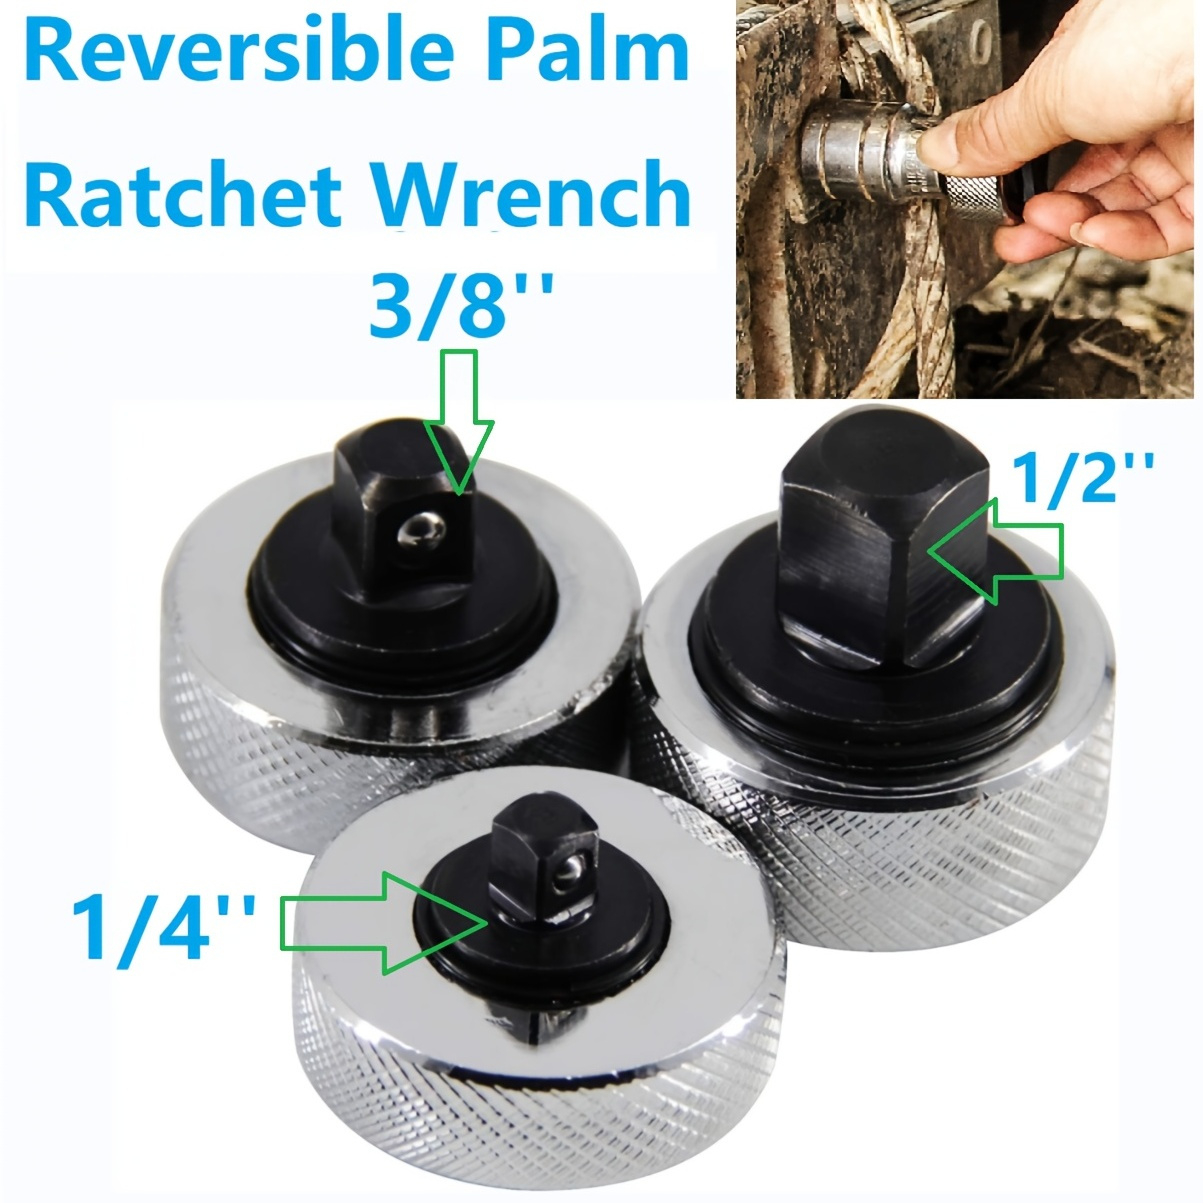 

3-piece Reversible Thumbwheel Ratchet Wrench Set - Get A Firm Grip On Your Projects With This 1/4'', 3/8'', And 1/2'' Drive Ratchet Set!